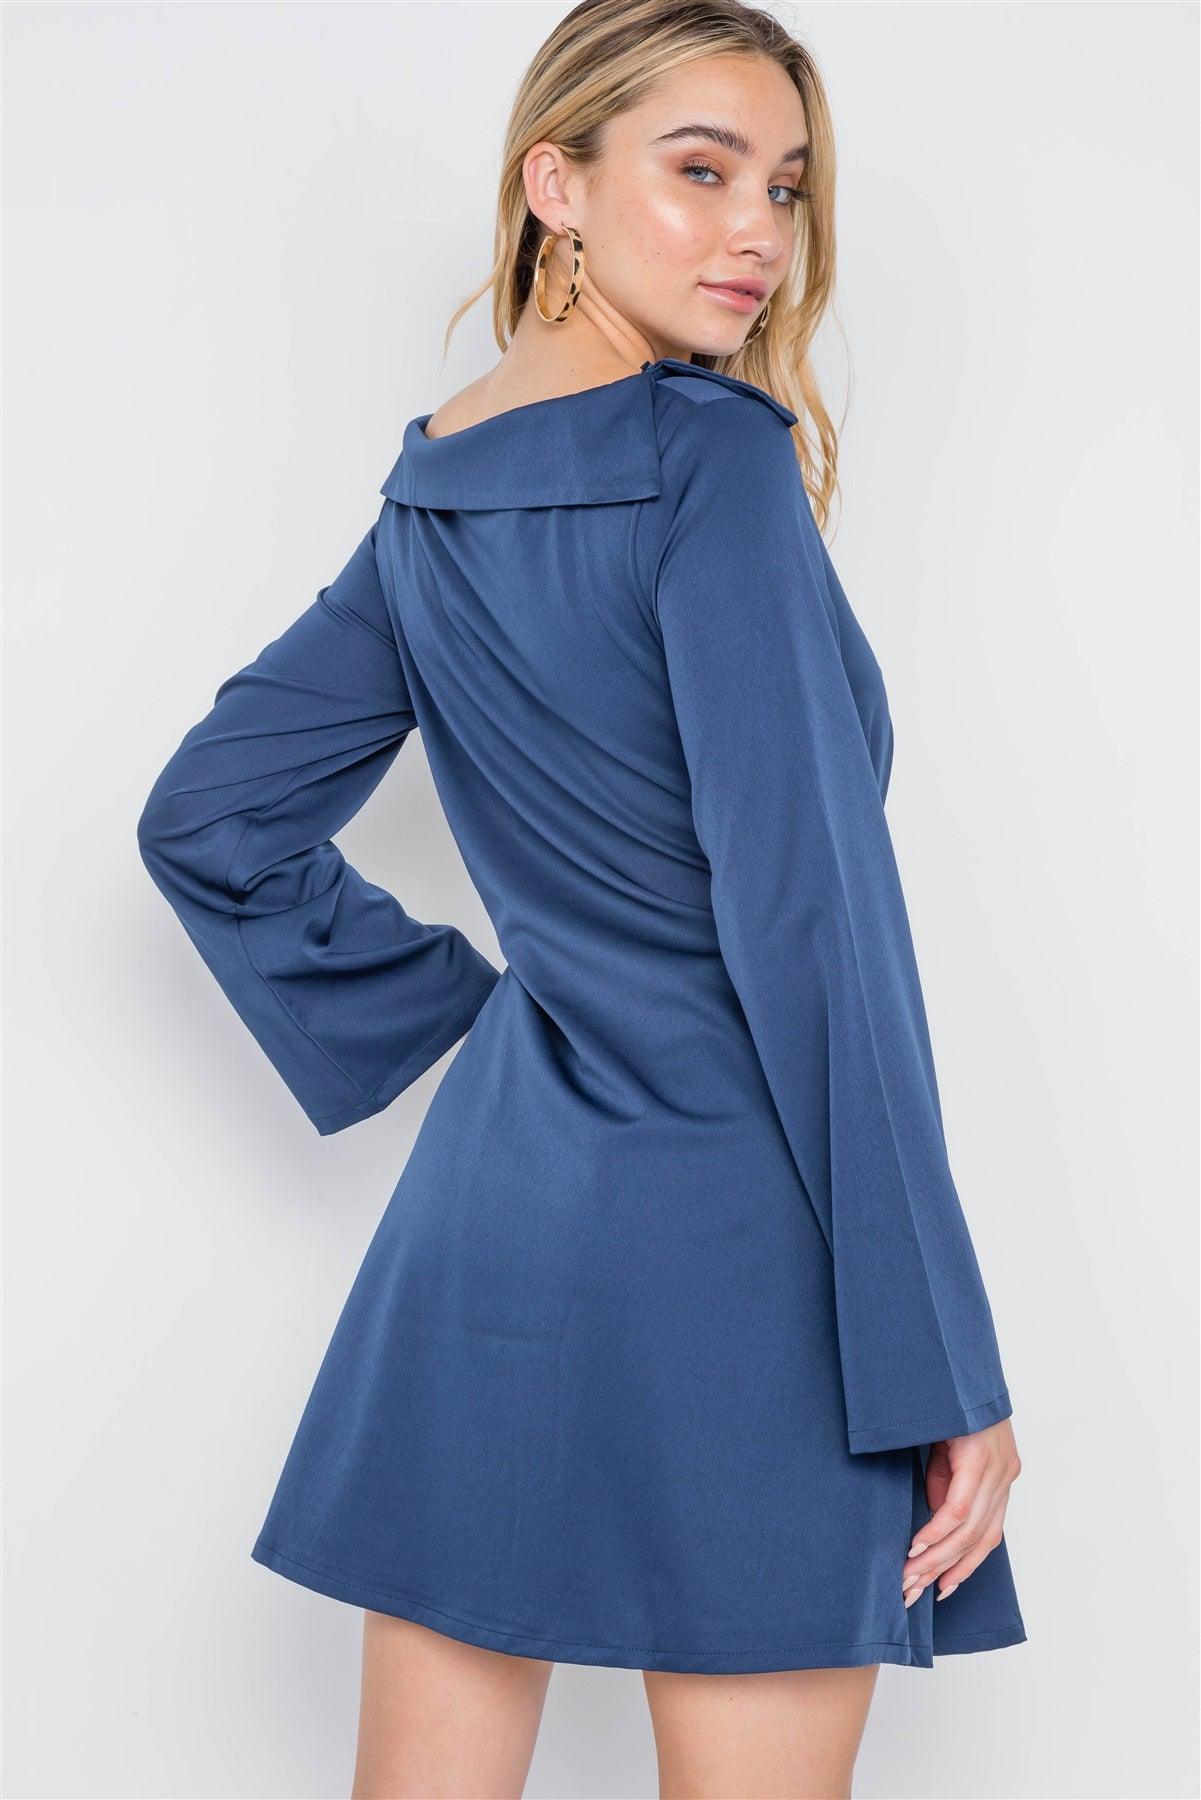 Navy Straight Neck Solid Front-Tie Dress /3-3